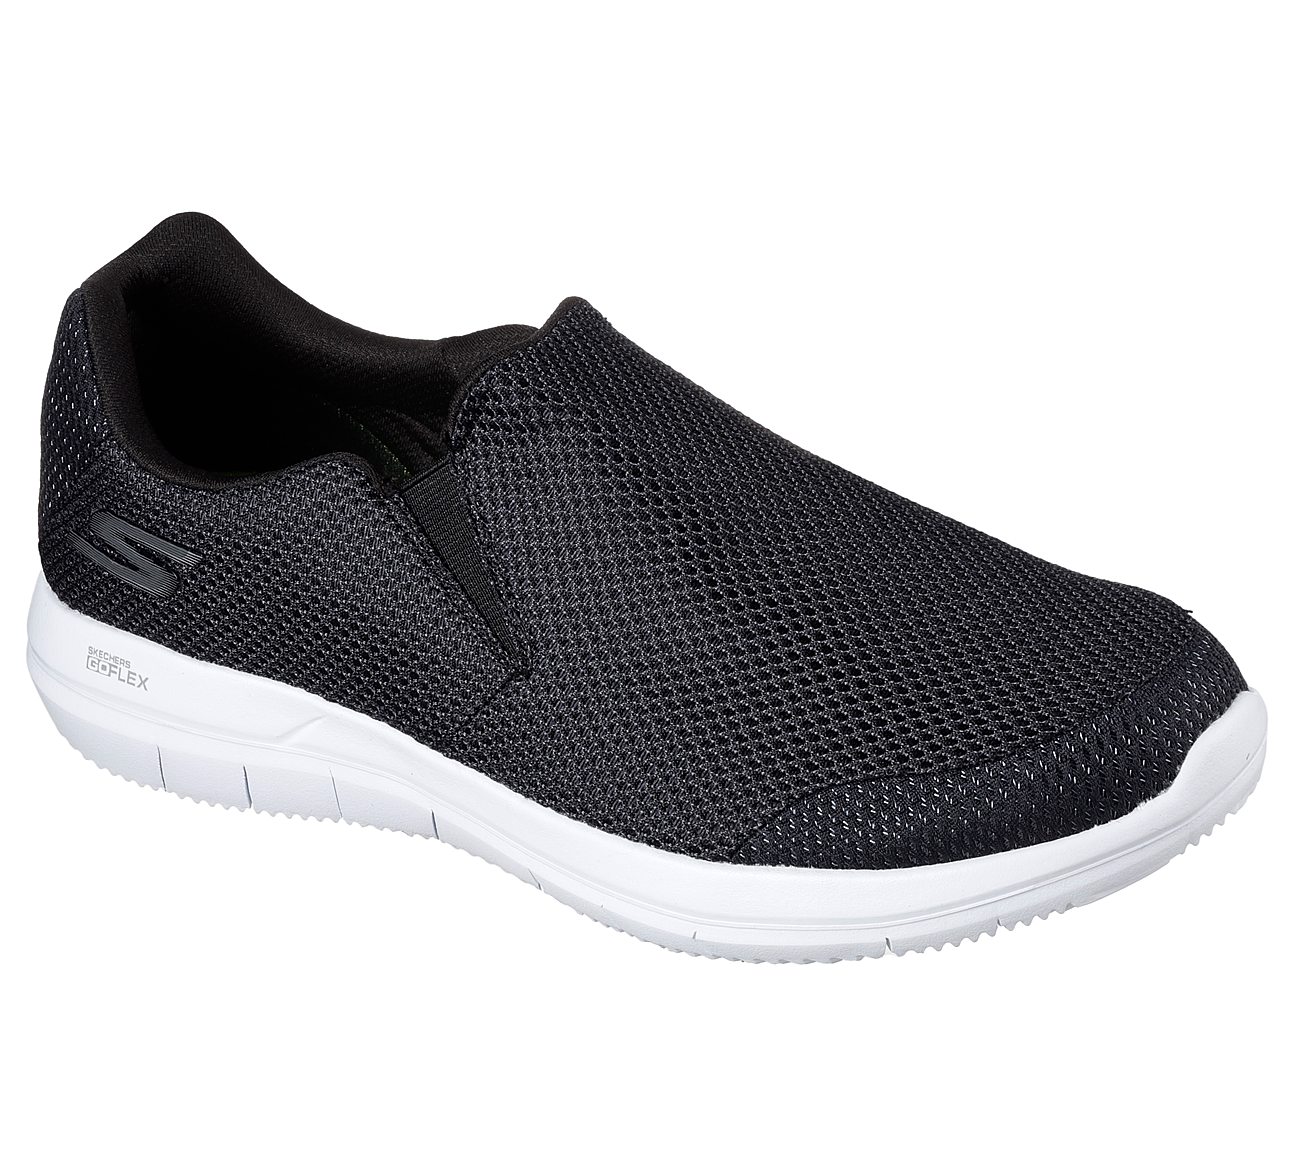 GO FLEX 2 - COMPLETION, BLACK/WHITE Footwear Lateral View